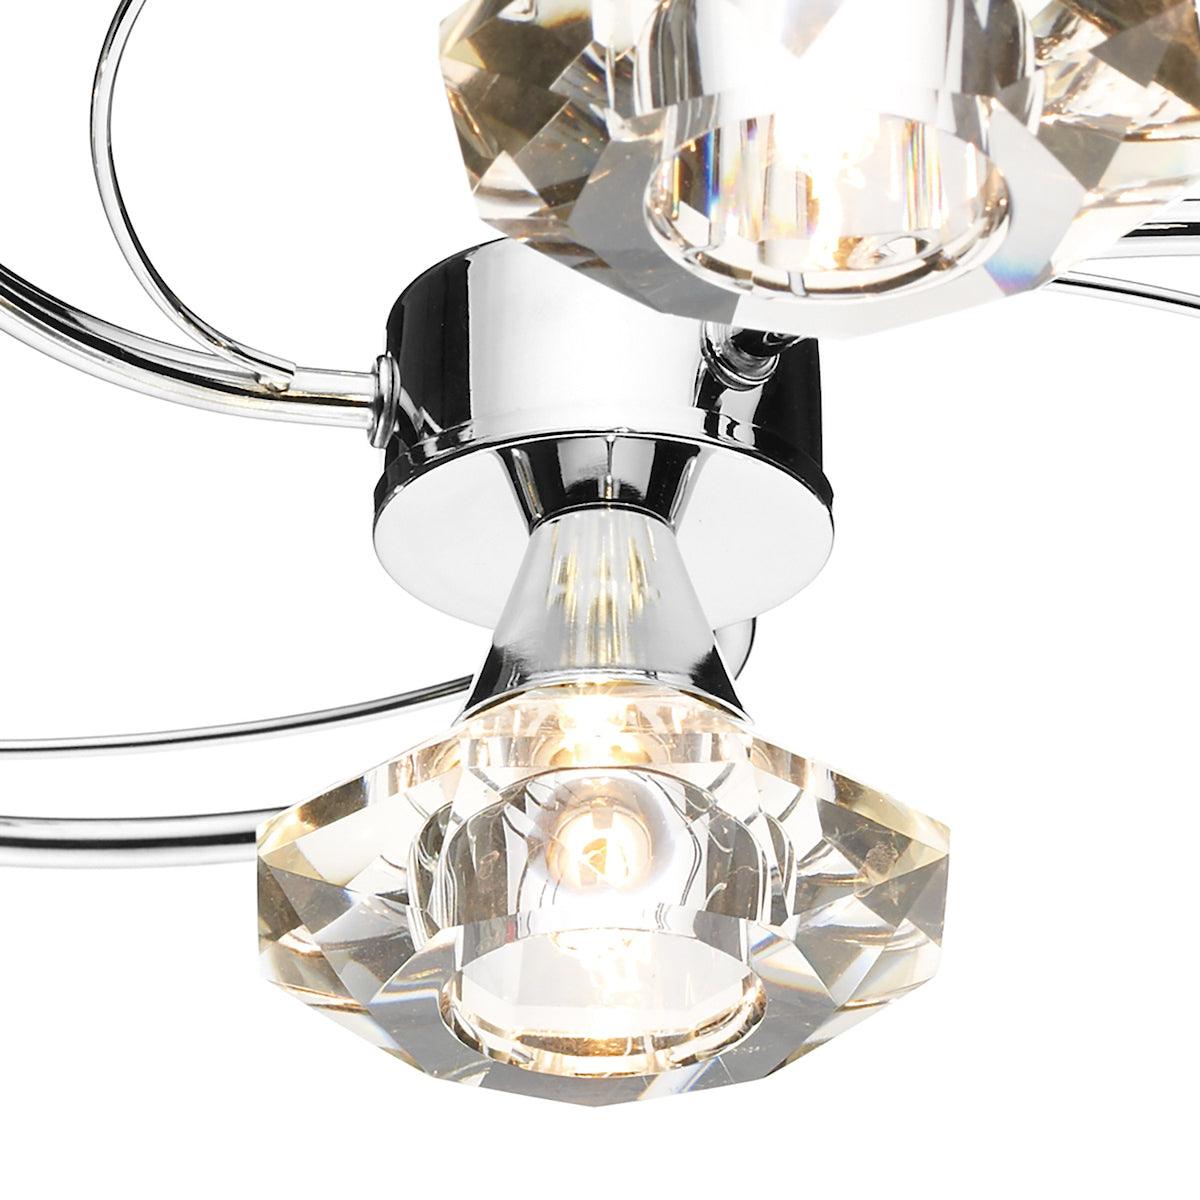 Luther 4 Light Semi Flush complete with Crystal Glass Polished Chrome - Peter Murphy Lighting & Electrical Ltd